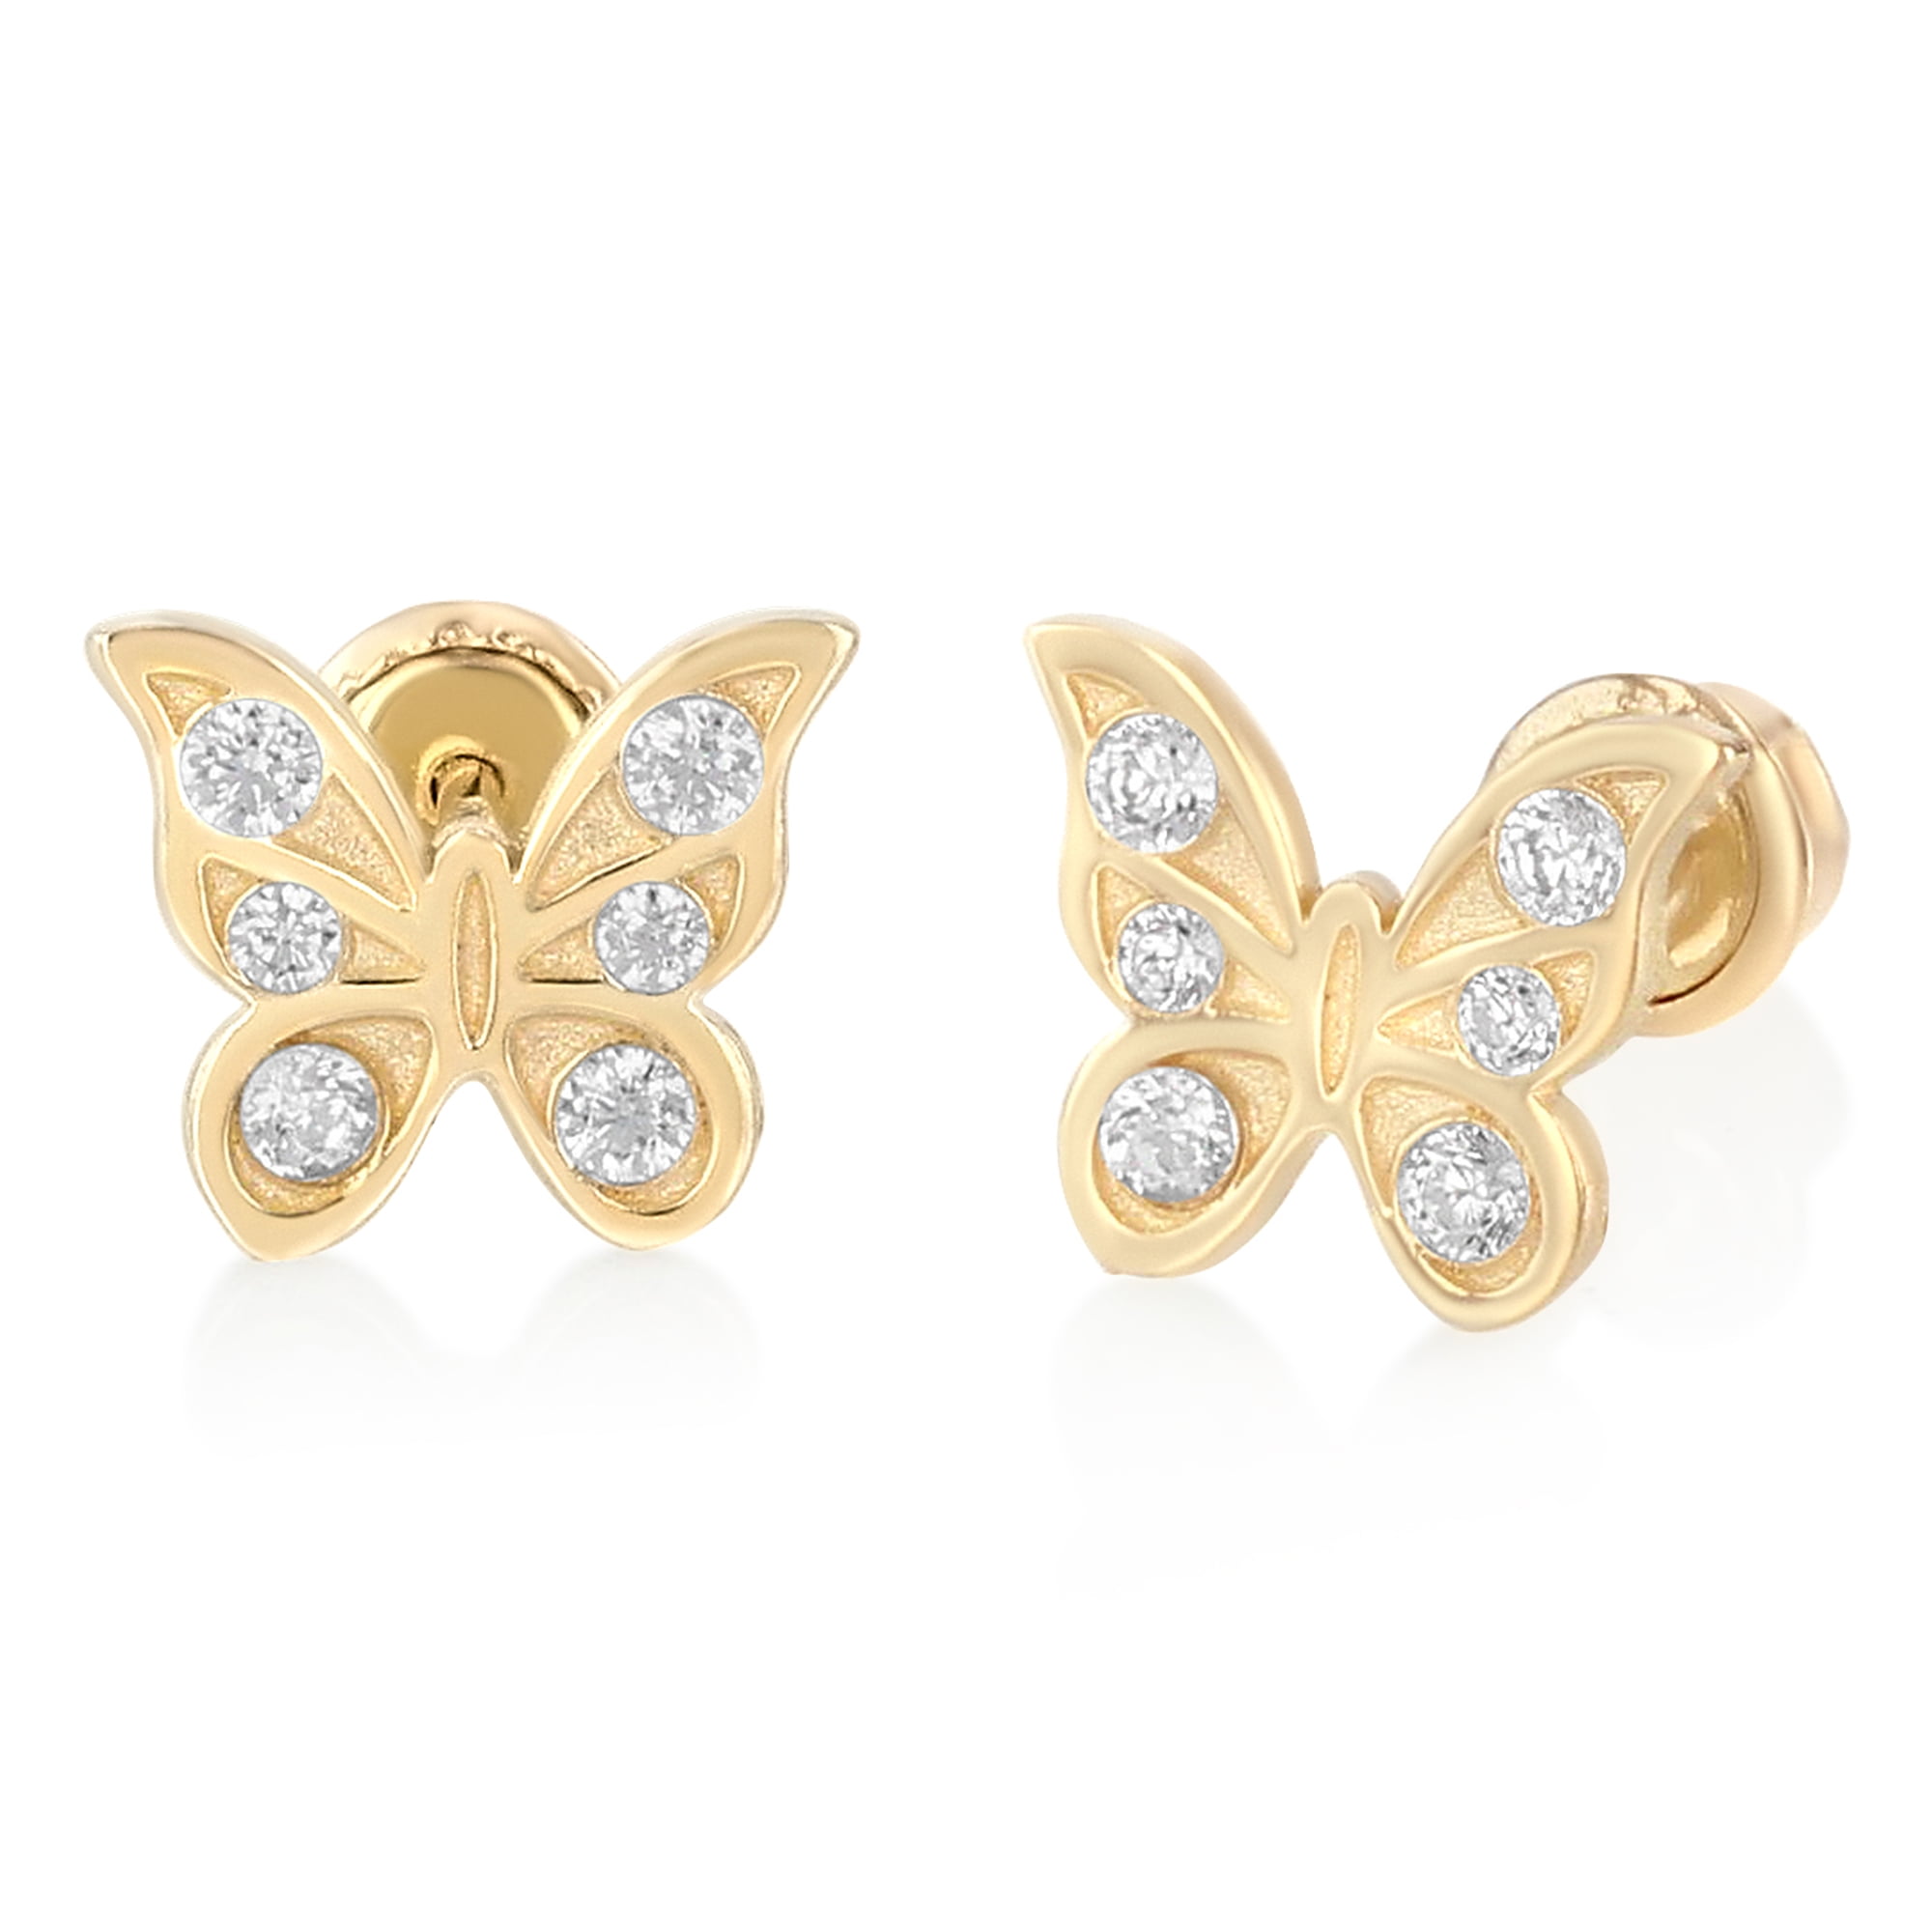 Two Earring Back Replacements, Threaded 14K Solid Yellow Gold, .0375